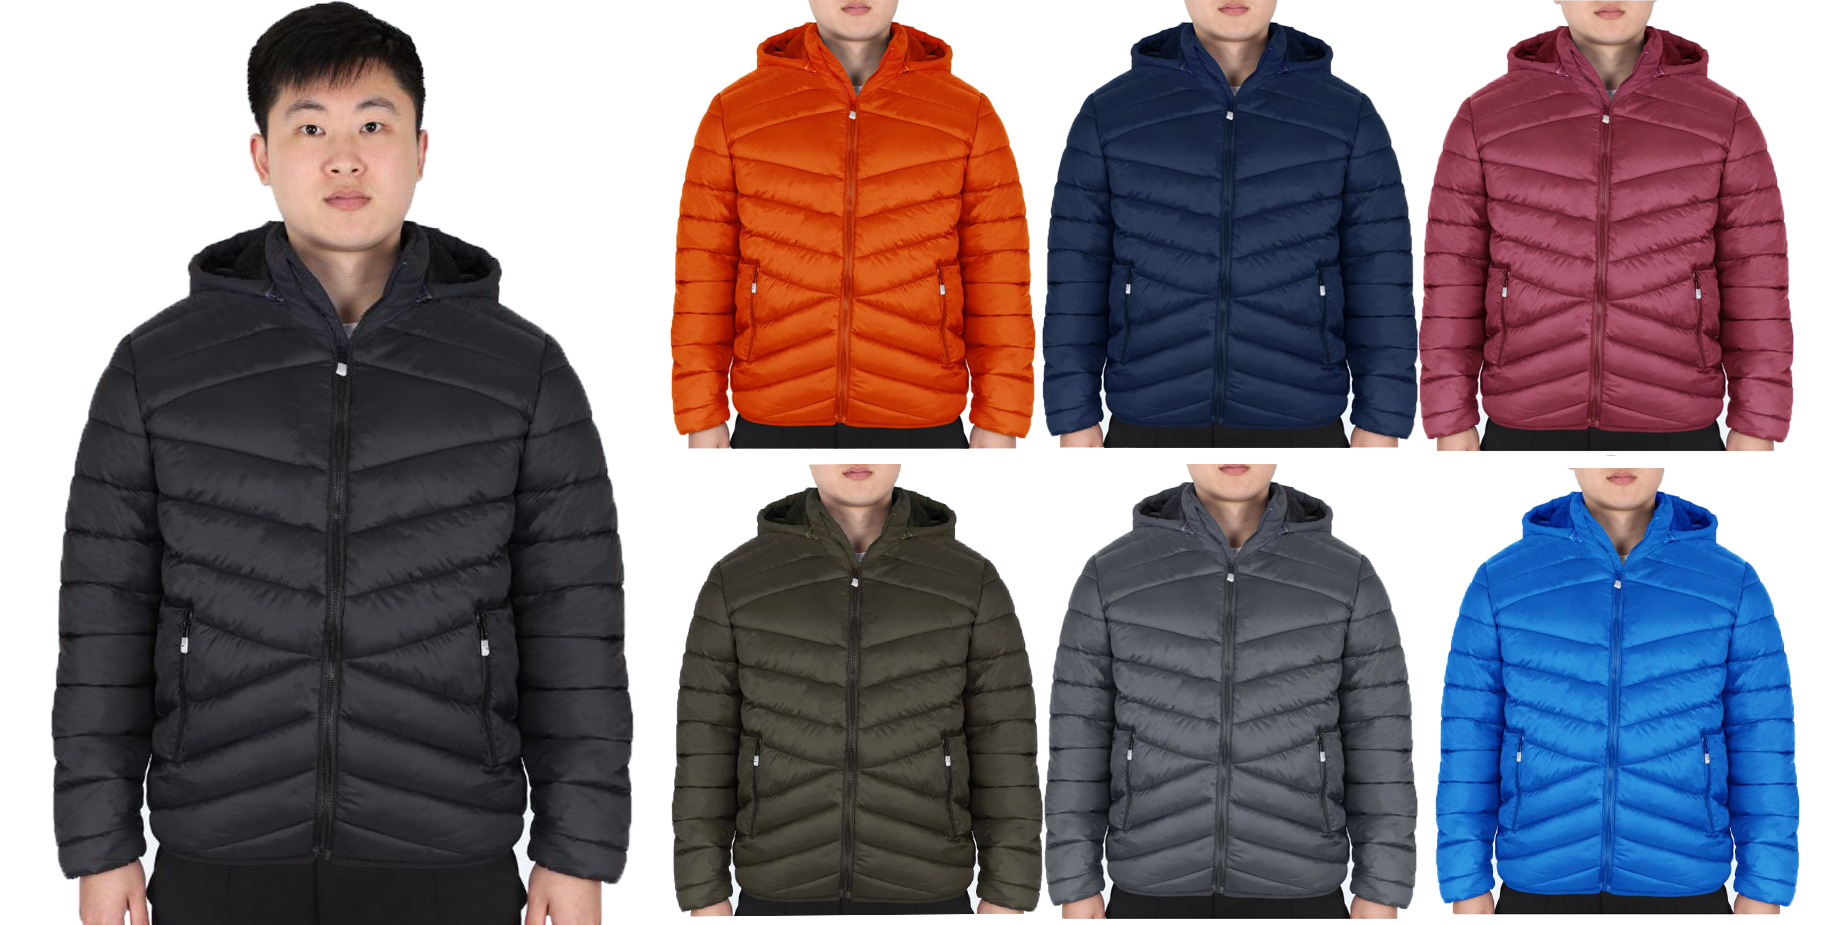 Men's Puffer Down Jackets w/ Sherpa Lining - Choose Your Color(s)